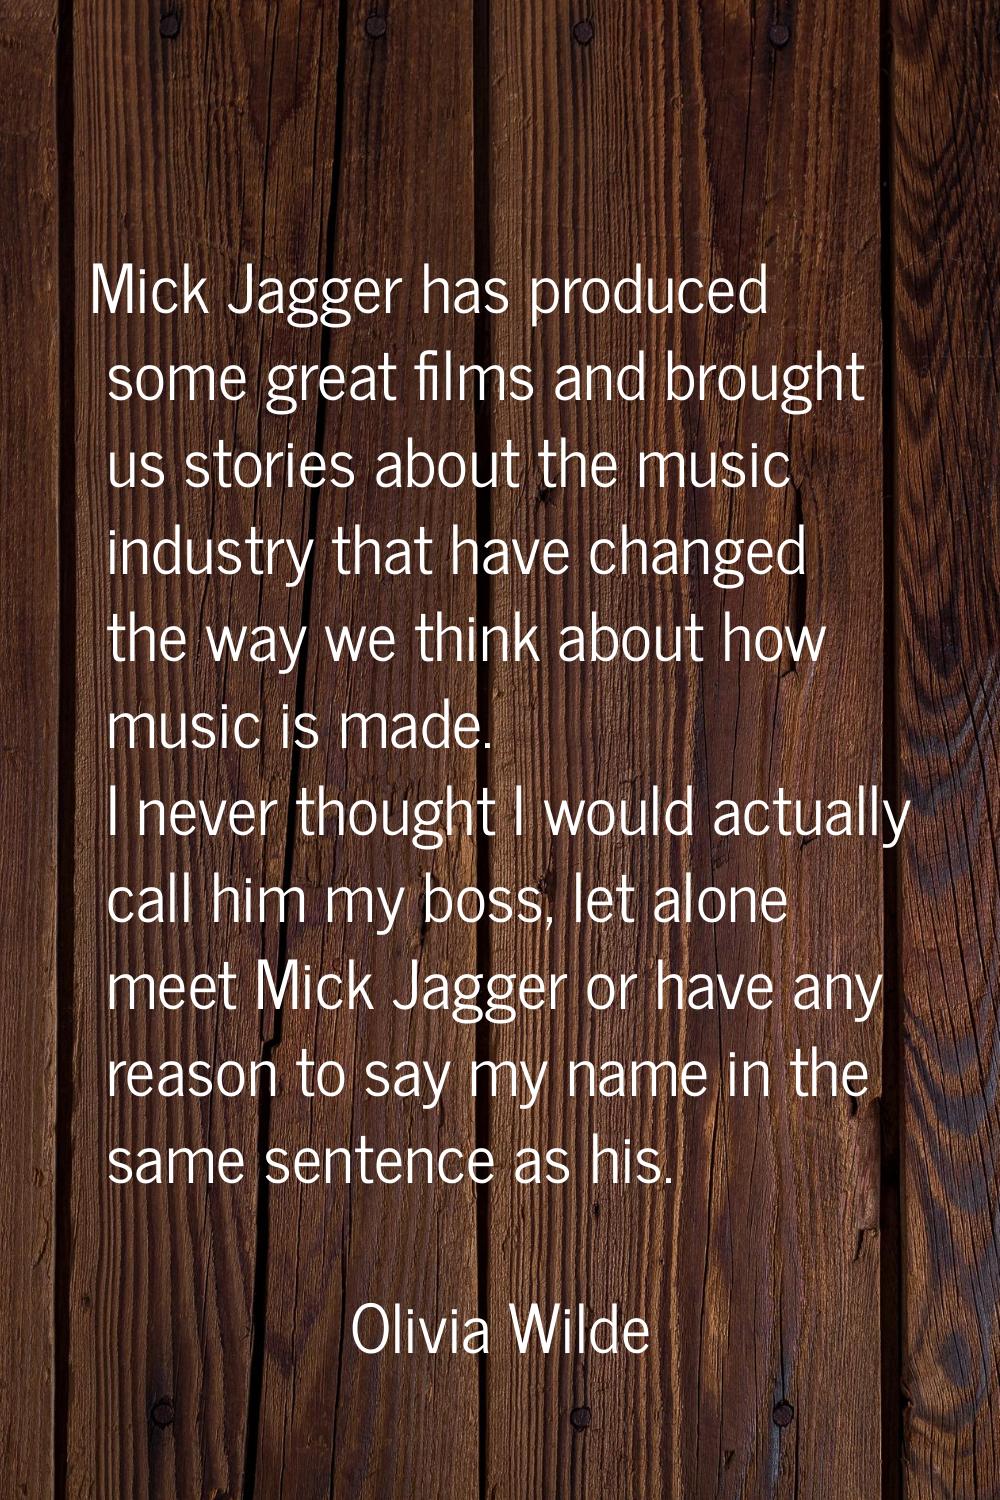 Mick Jagger has produced some great films and brought us stories about the music industry that have